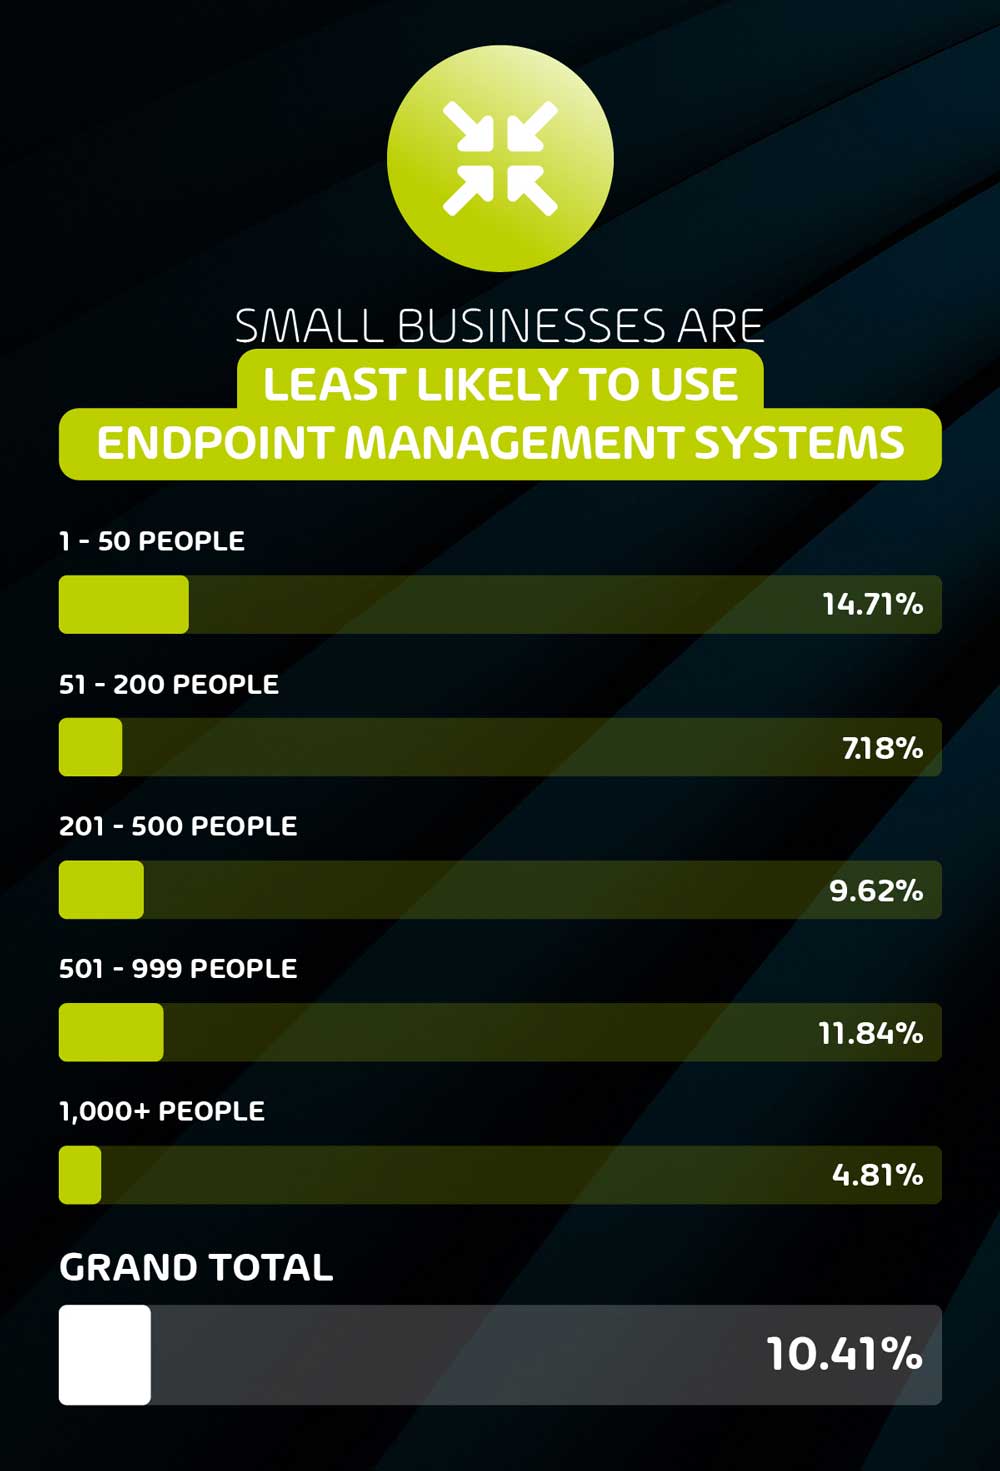 Small Businesses are least likely to use Endpoint Management Systems